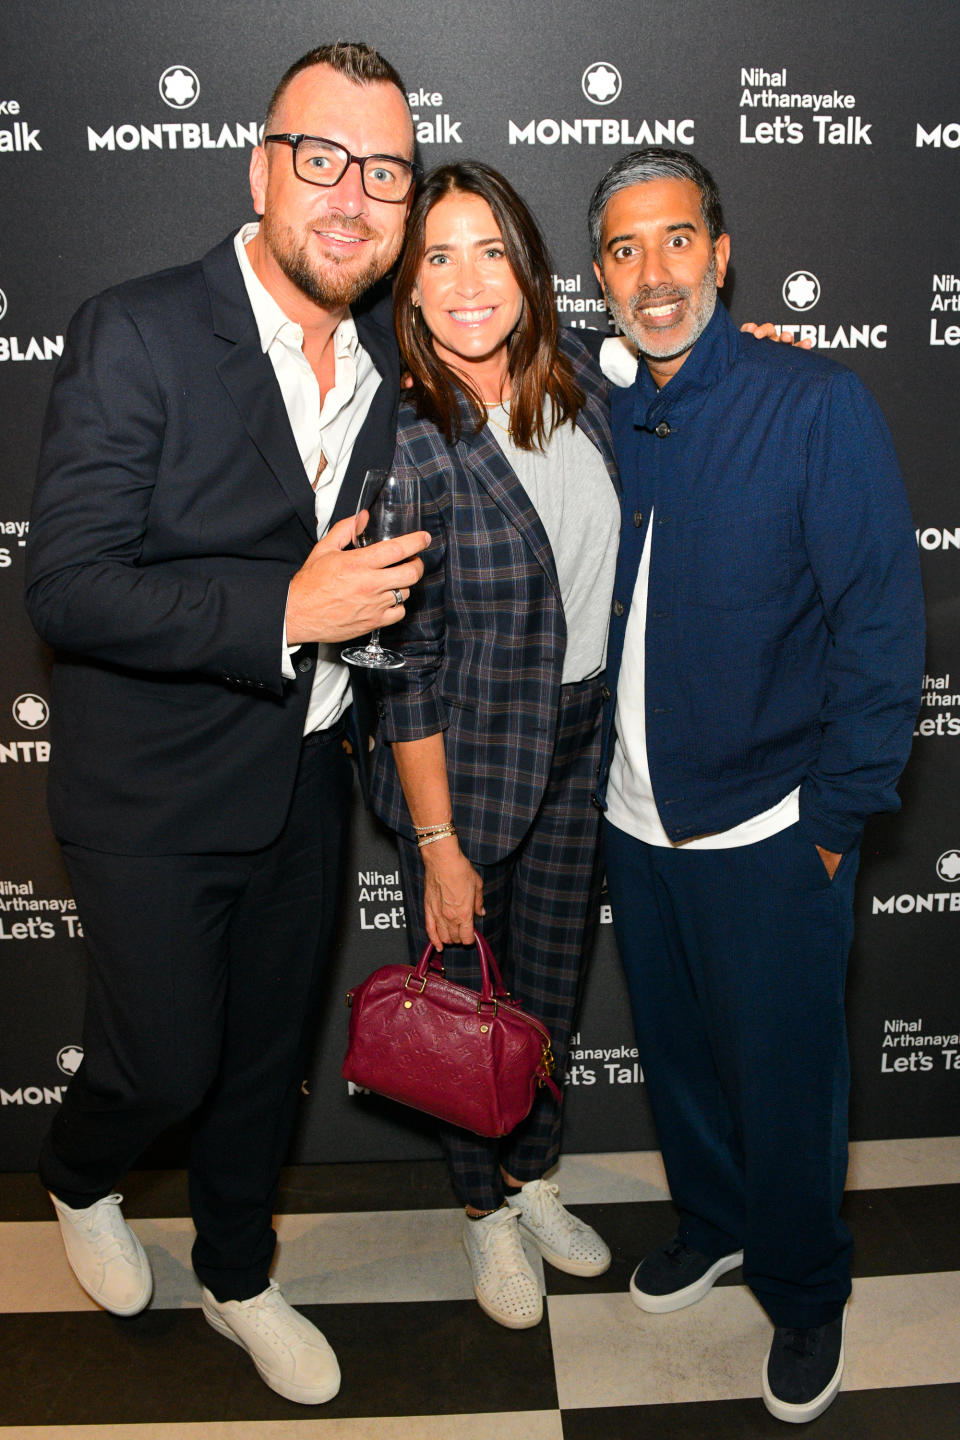 George Smart, fiancé and current partner of Lisa Snowdon, pictured with Nihal Arthanayake (R) at the launch of 'Let's Talk: How To Have Better Conversations' hosted by Montblanc and Nihal Arthanayake in London, August, 2022. (Getty Images)